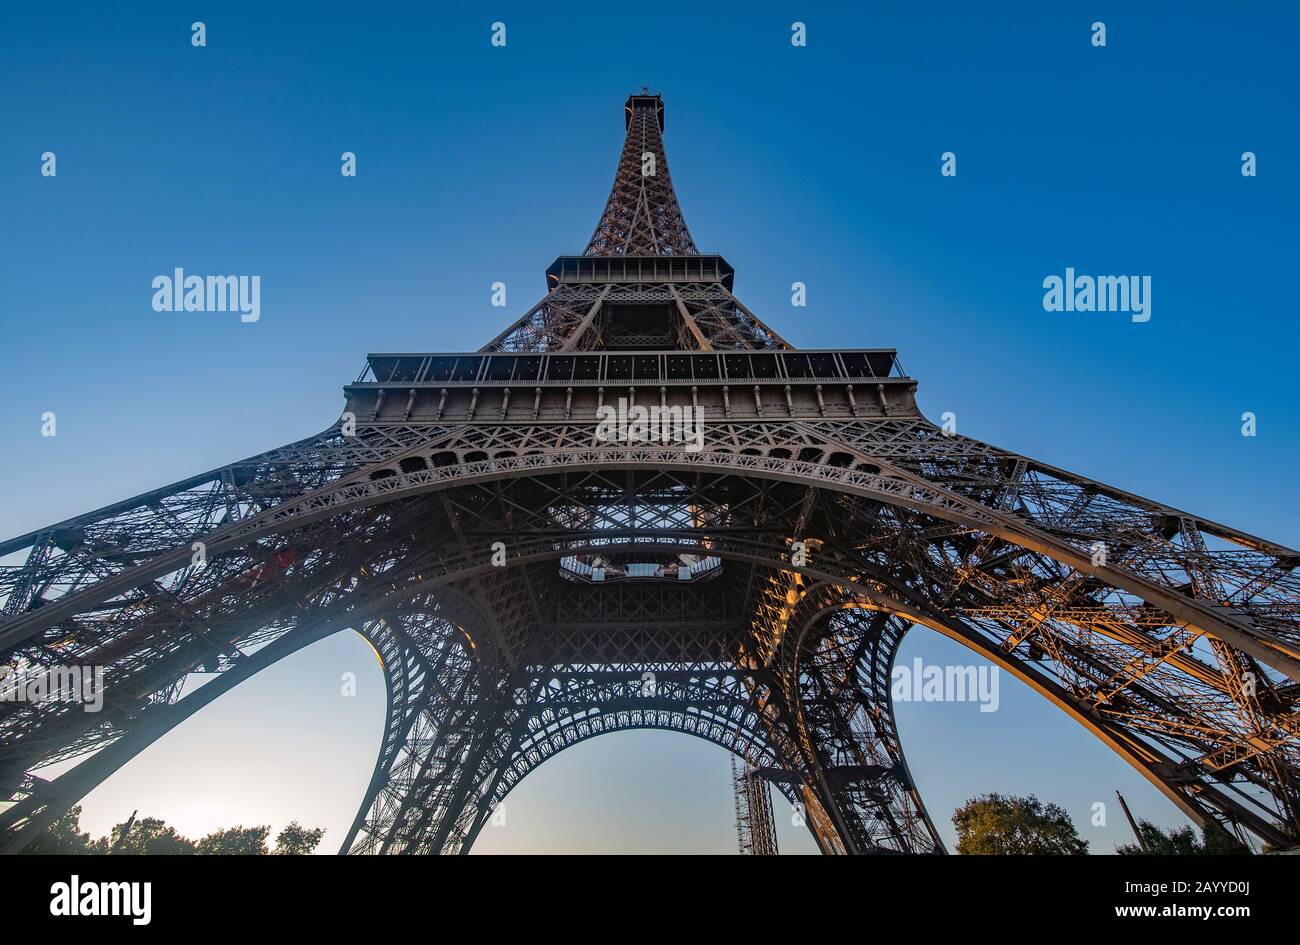 Eiffel Tower seen from below with a blue sky in the background Stock Photo